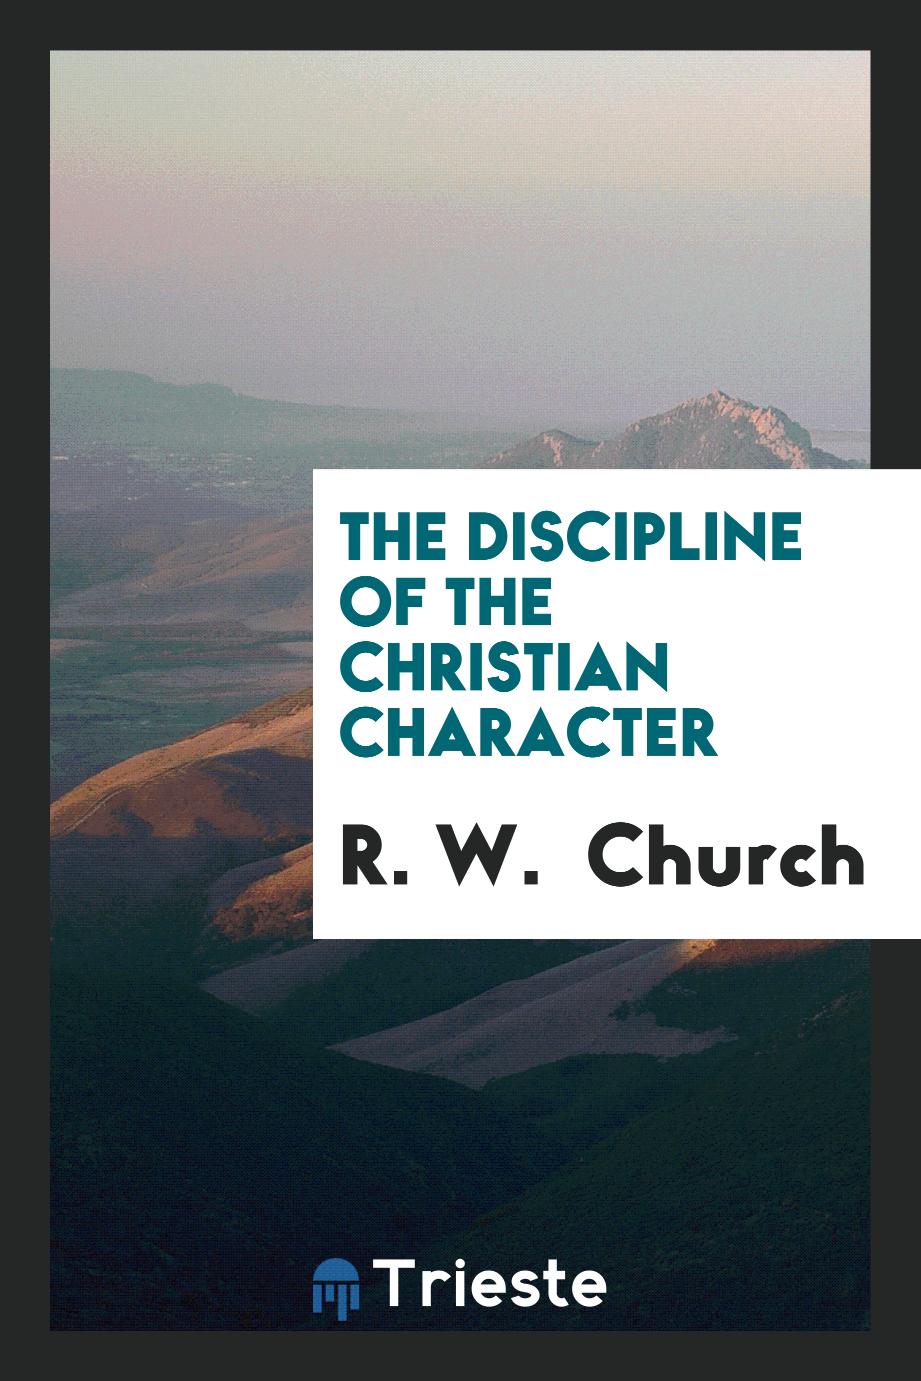 The discipline of the Christian character